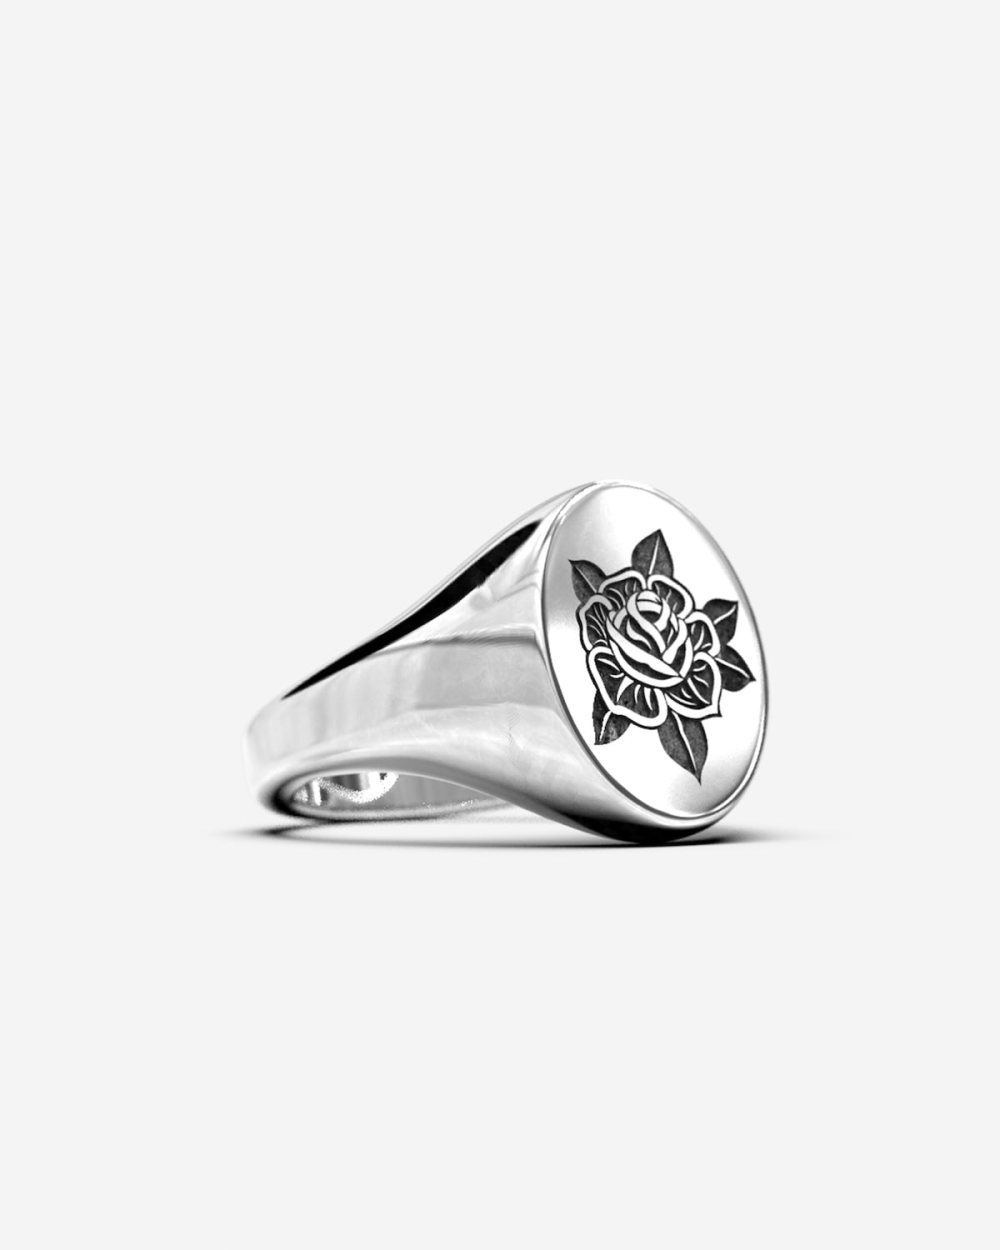 MEDIUM OVAL SIGNET RING WITH ENGRAVING